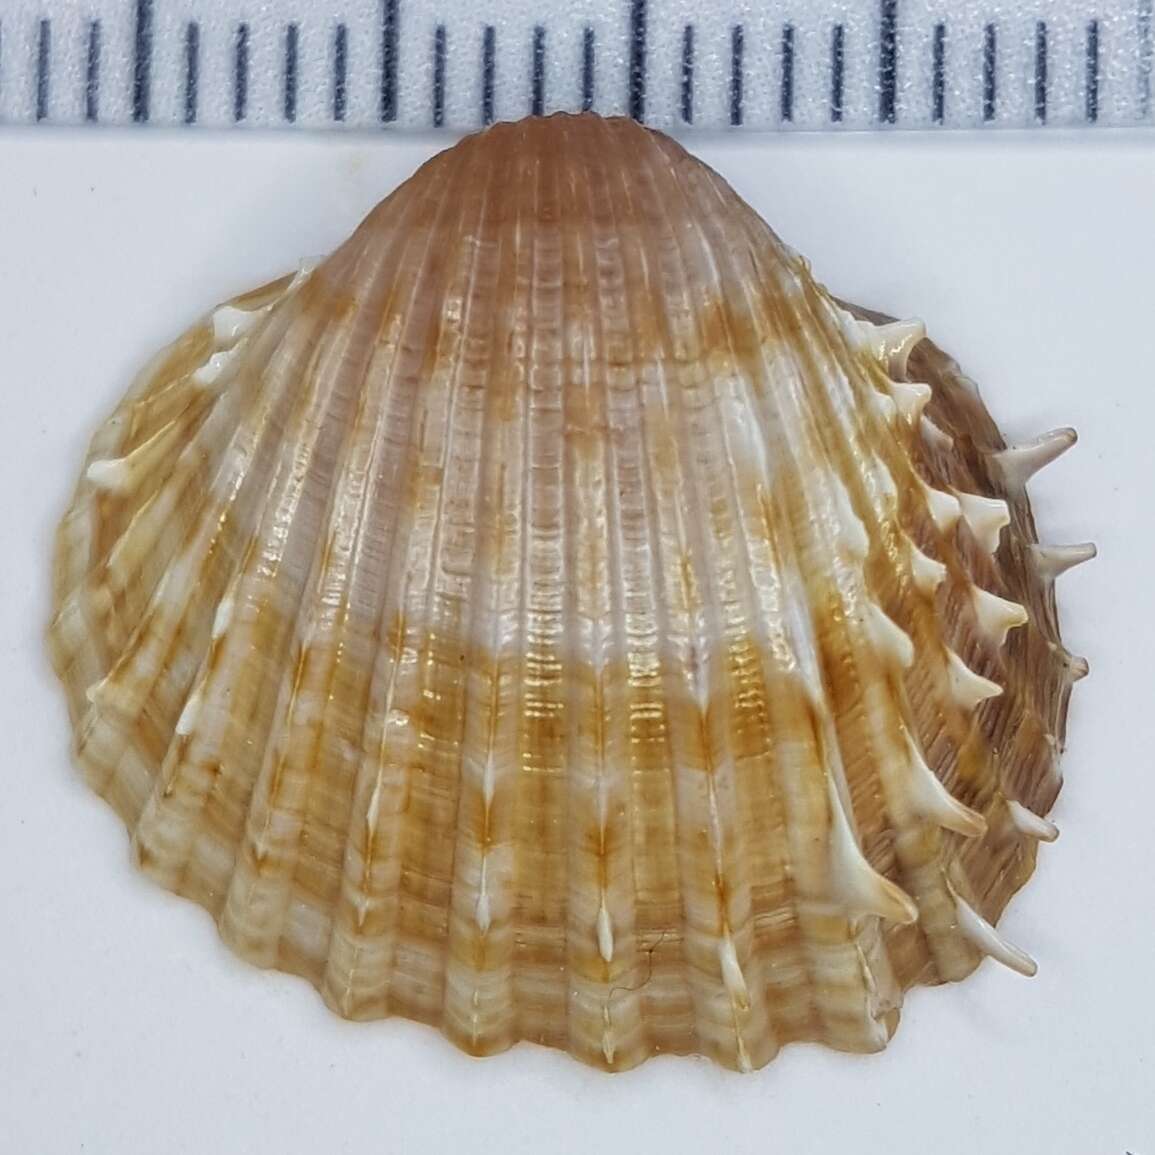 Image of spiny cockle